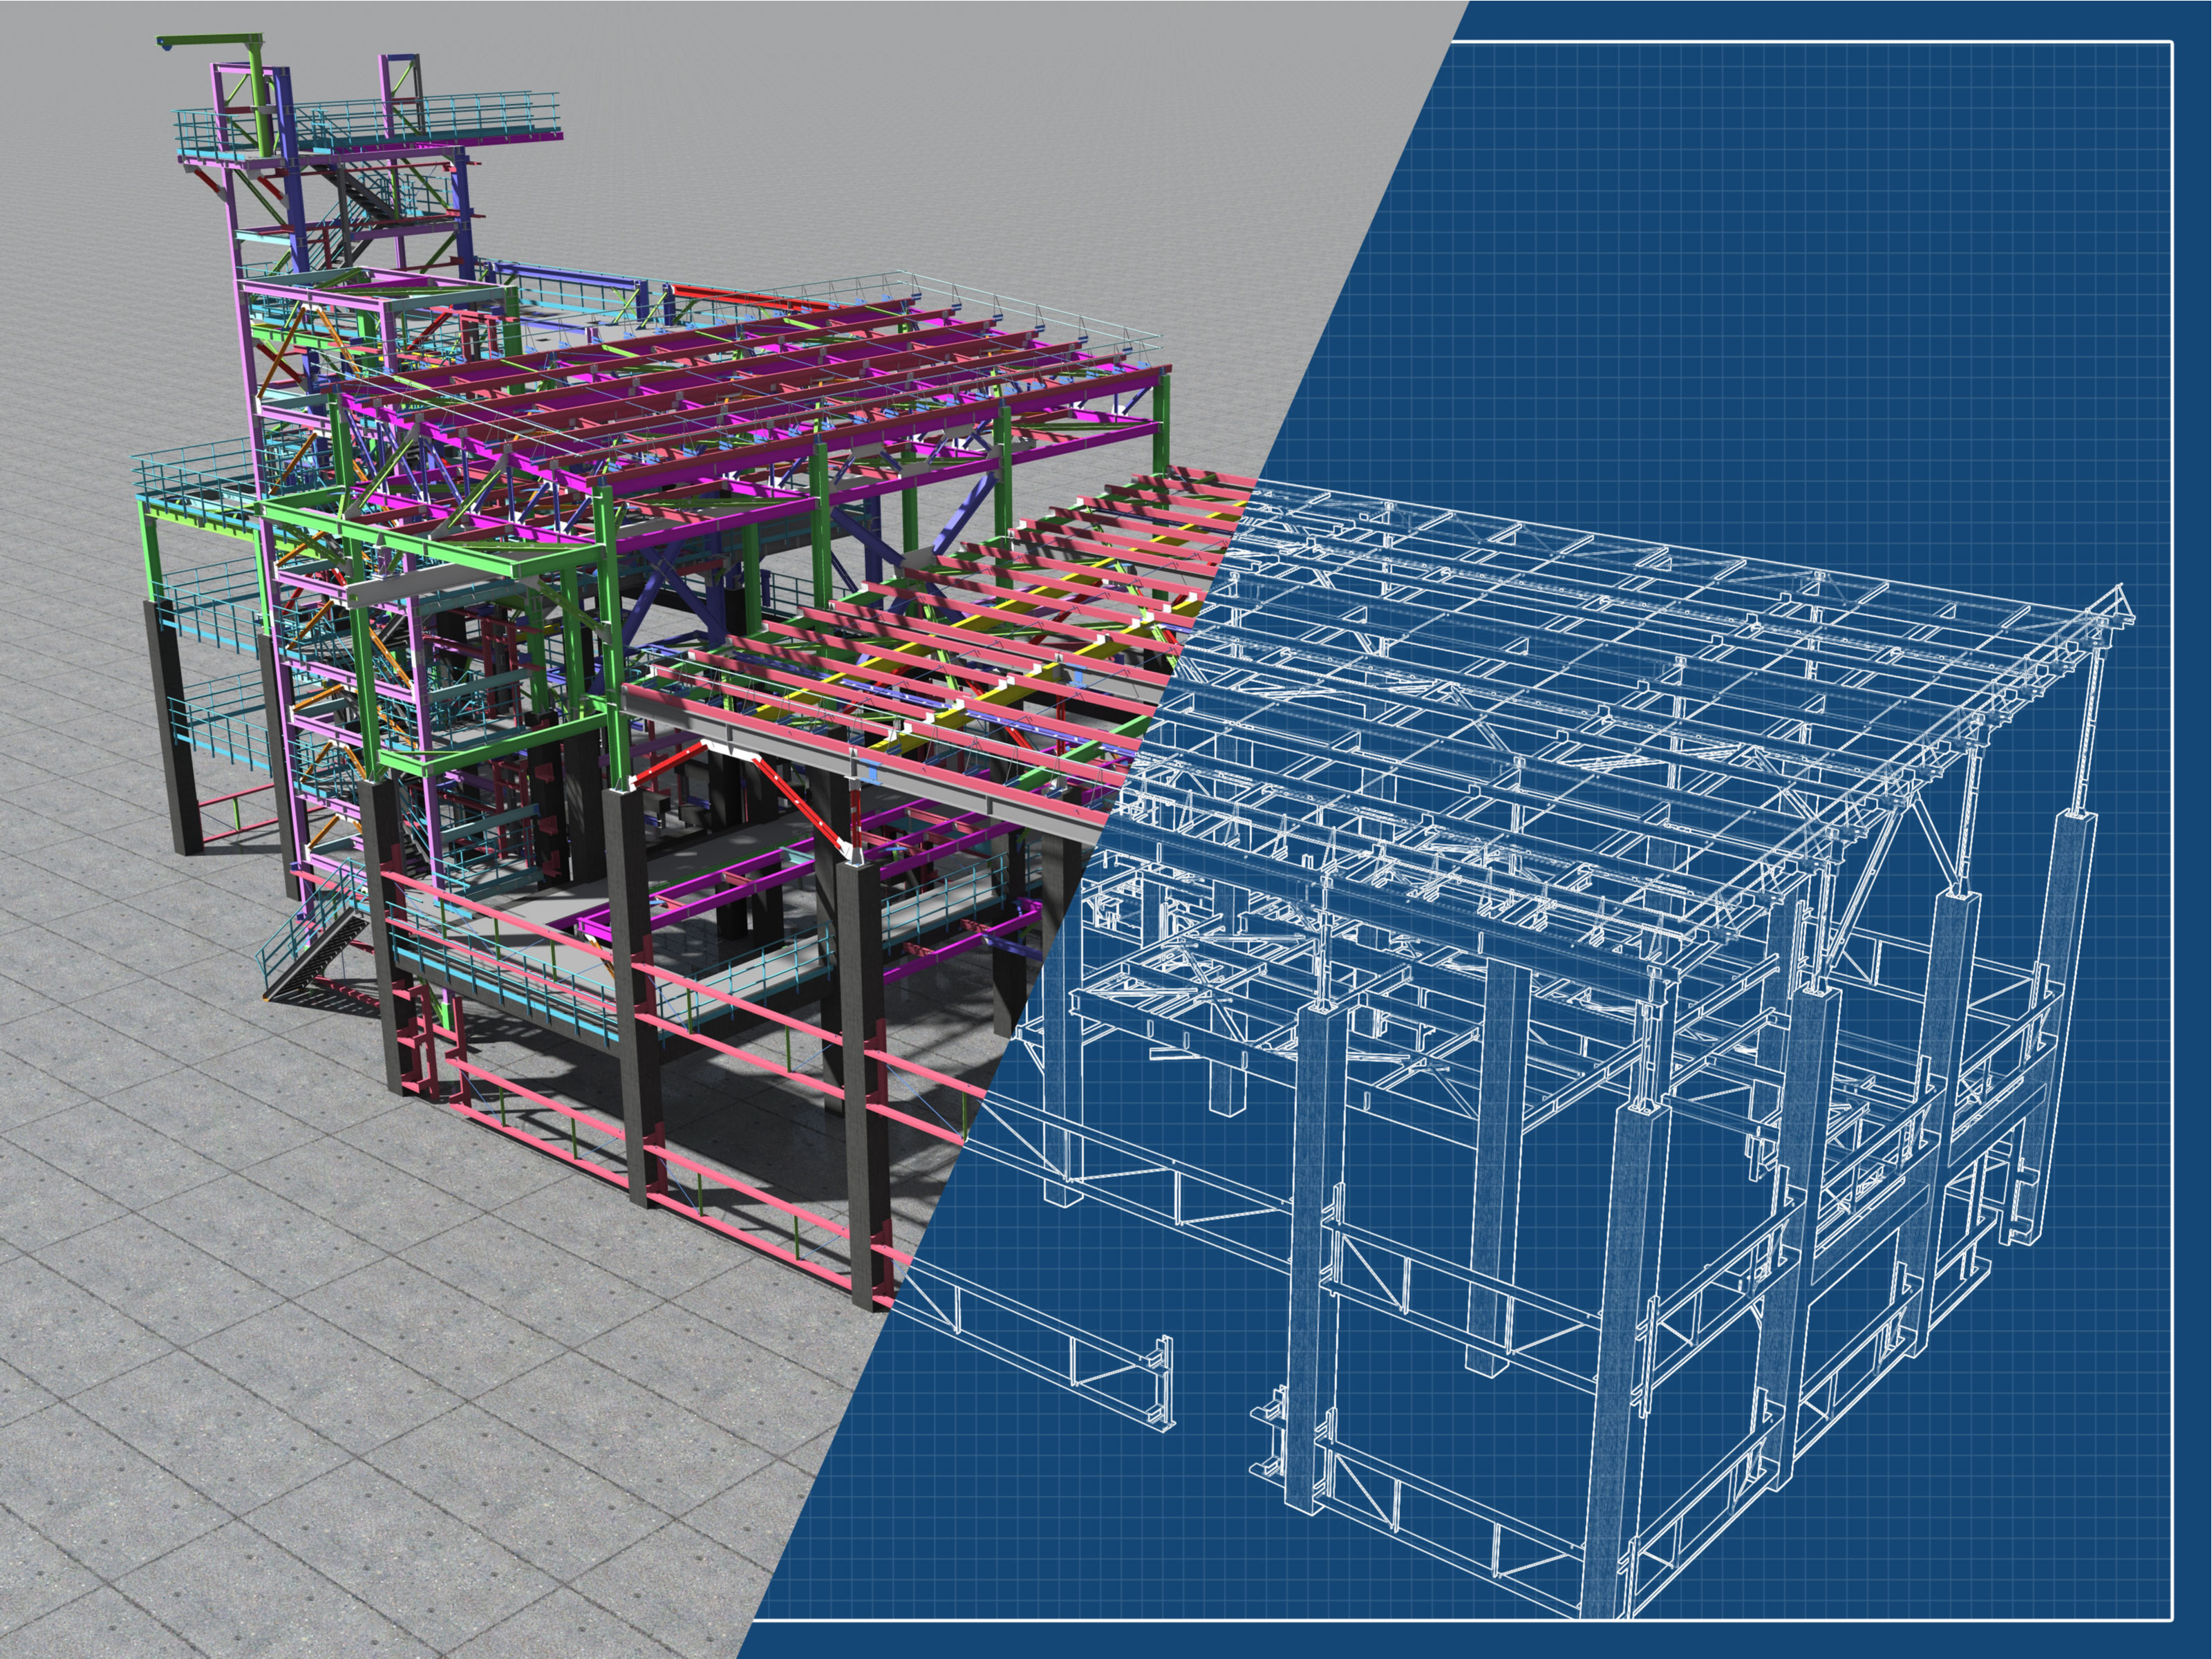 BIM increased clarity and project understanding throughout the